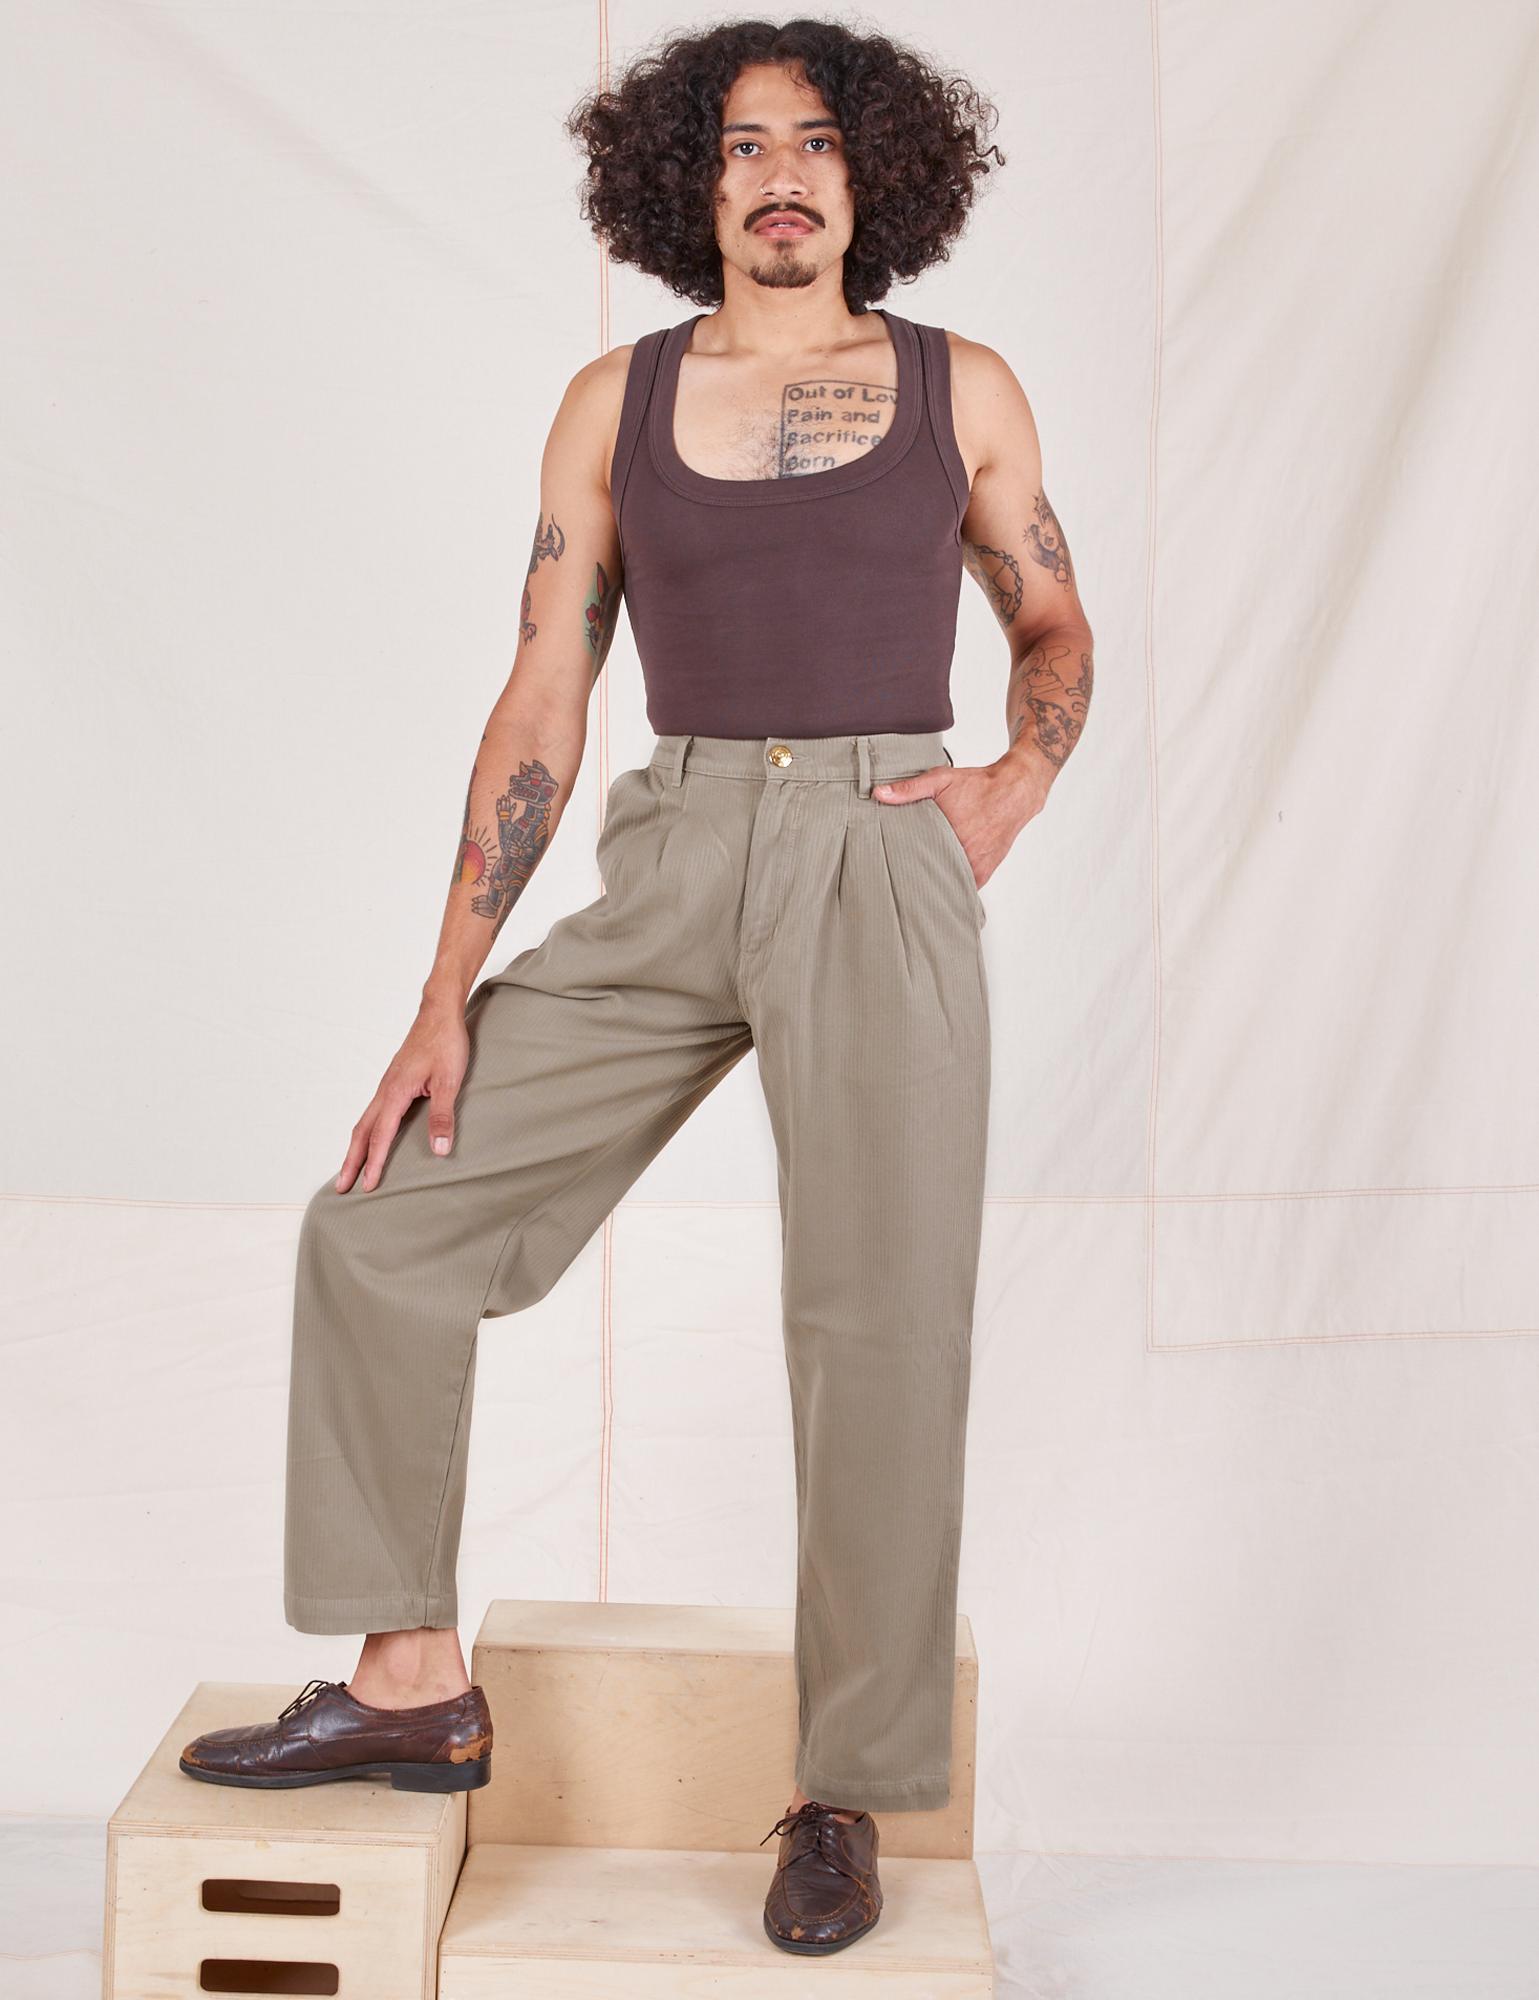 Jesse is 5&#39;8&quot; and wearing XS Heritage Trousers in Khaki Grey paired with espresso brown Tank Top